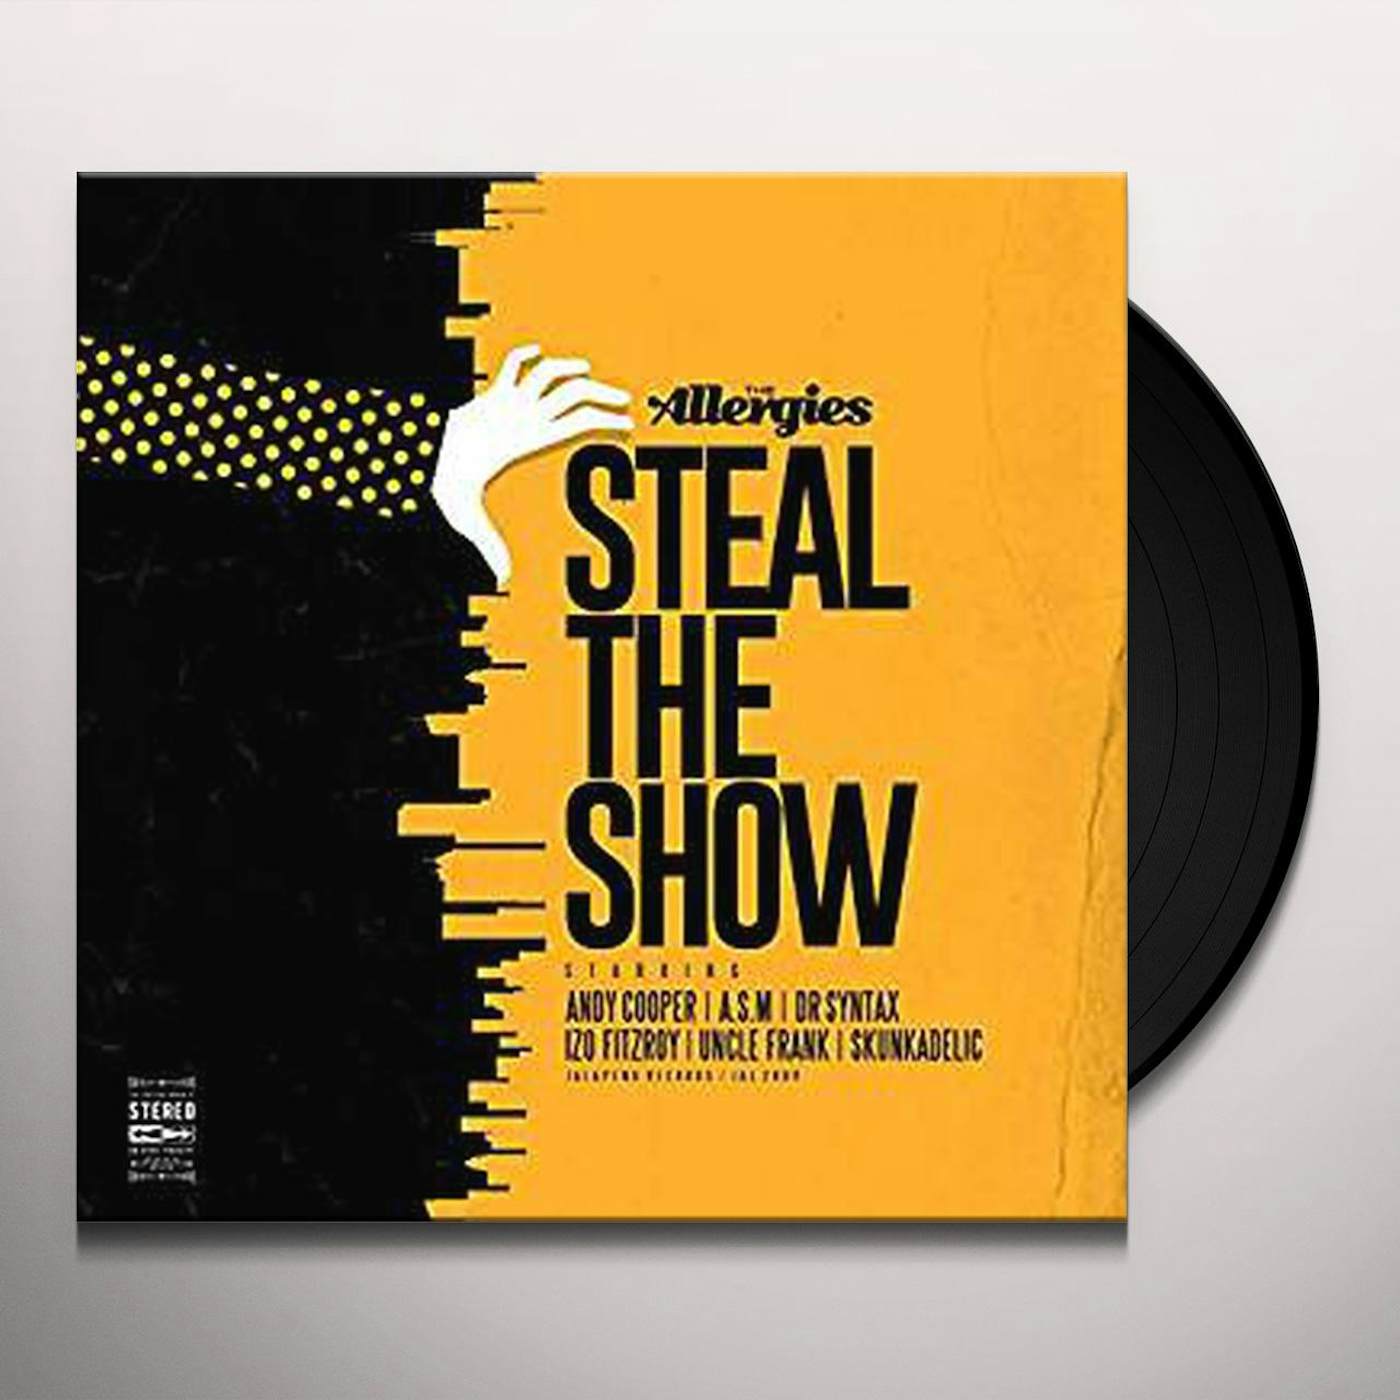 The Allergies Steal the Show Vinyl Record